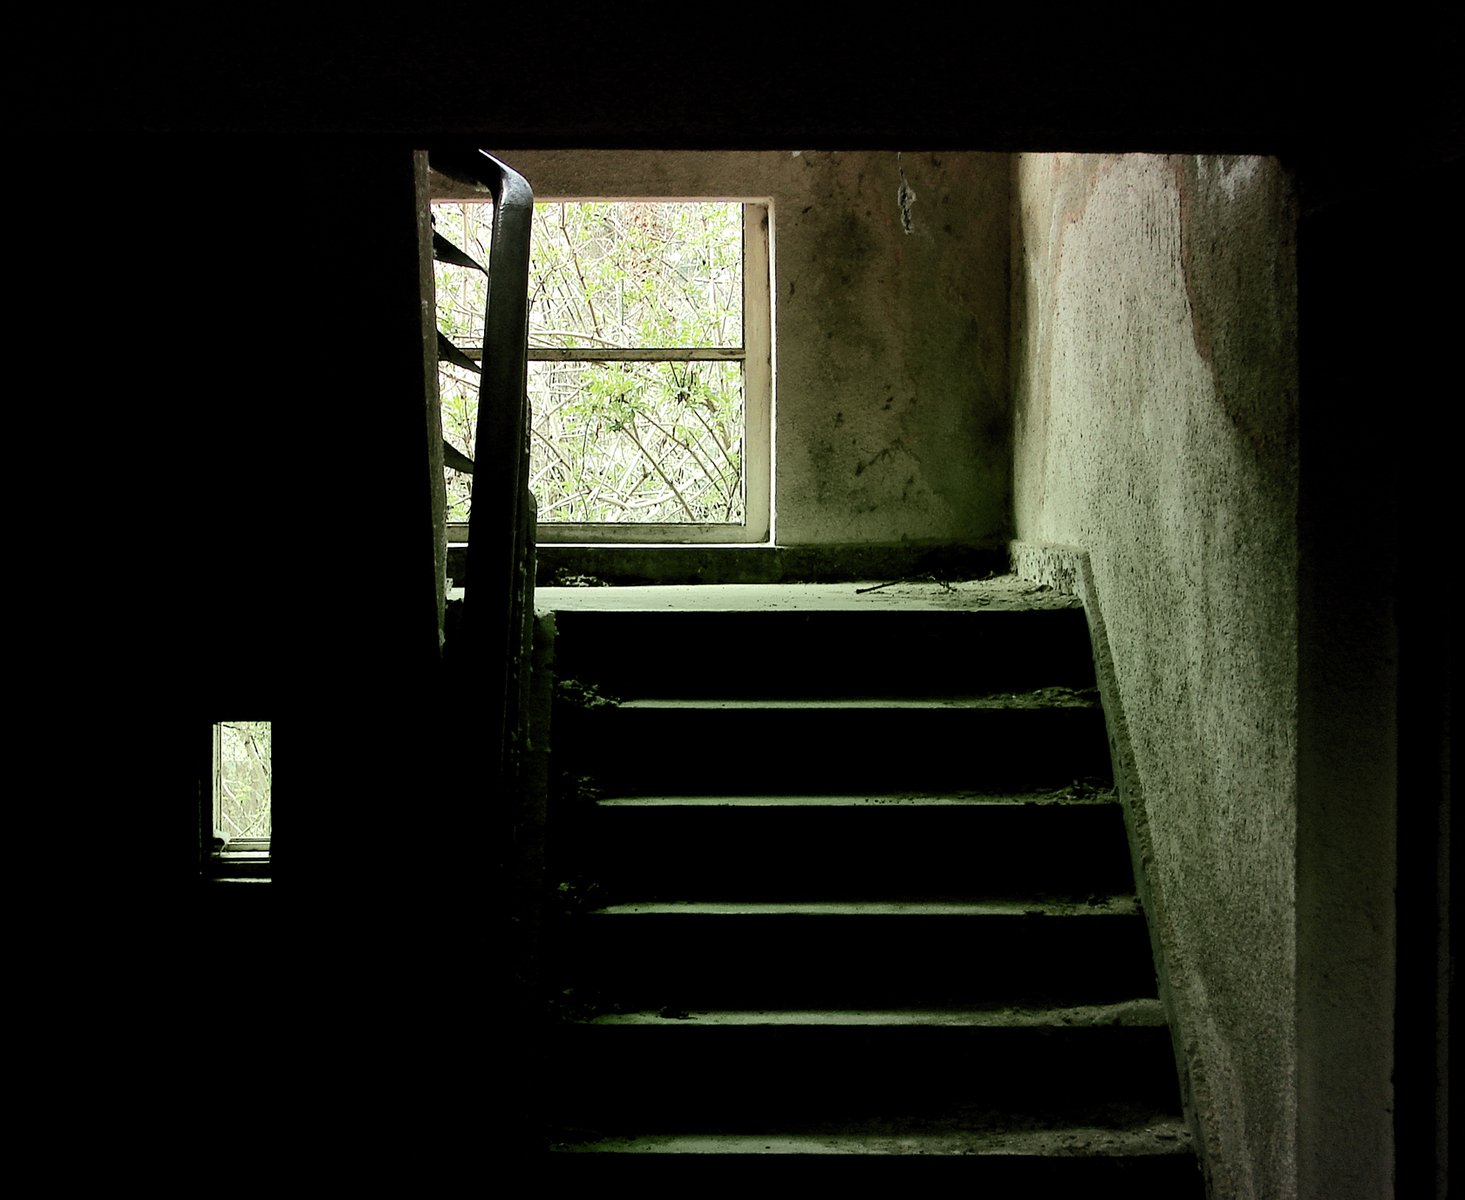 the inside of a building with a stairway leading to an open window